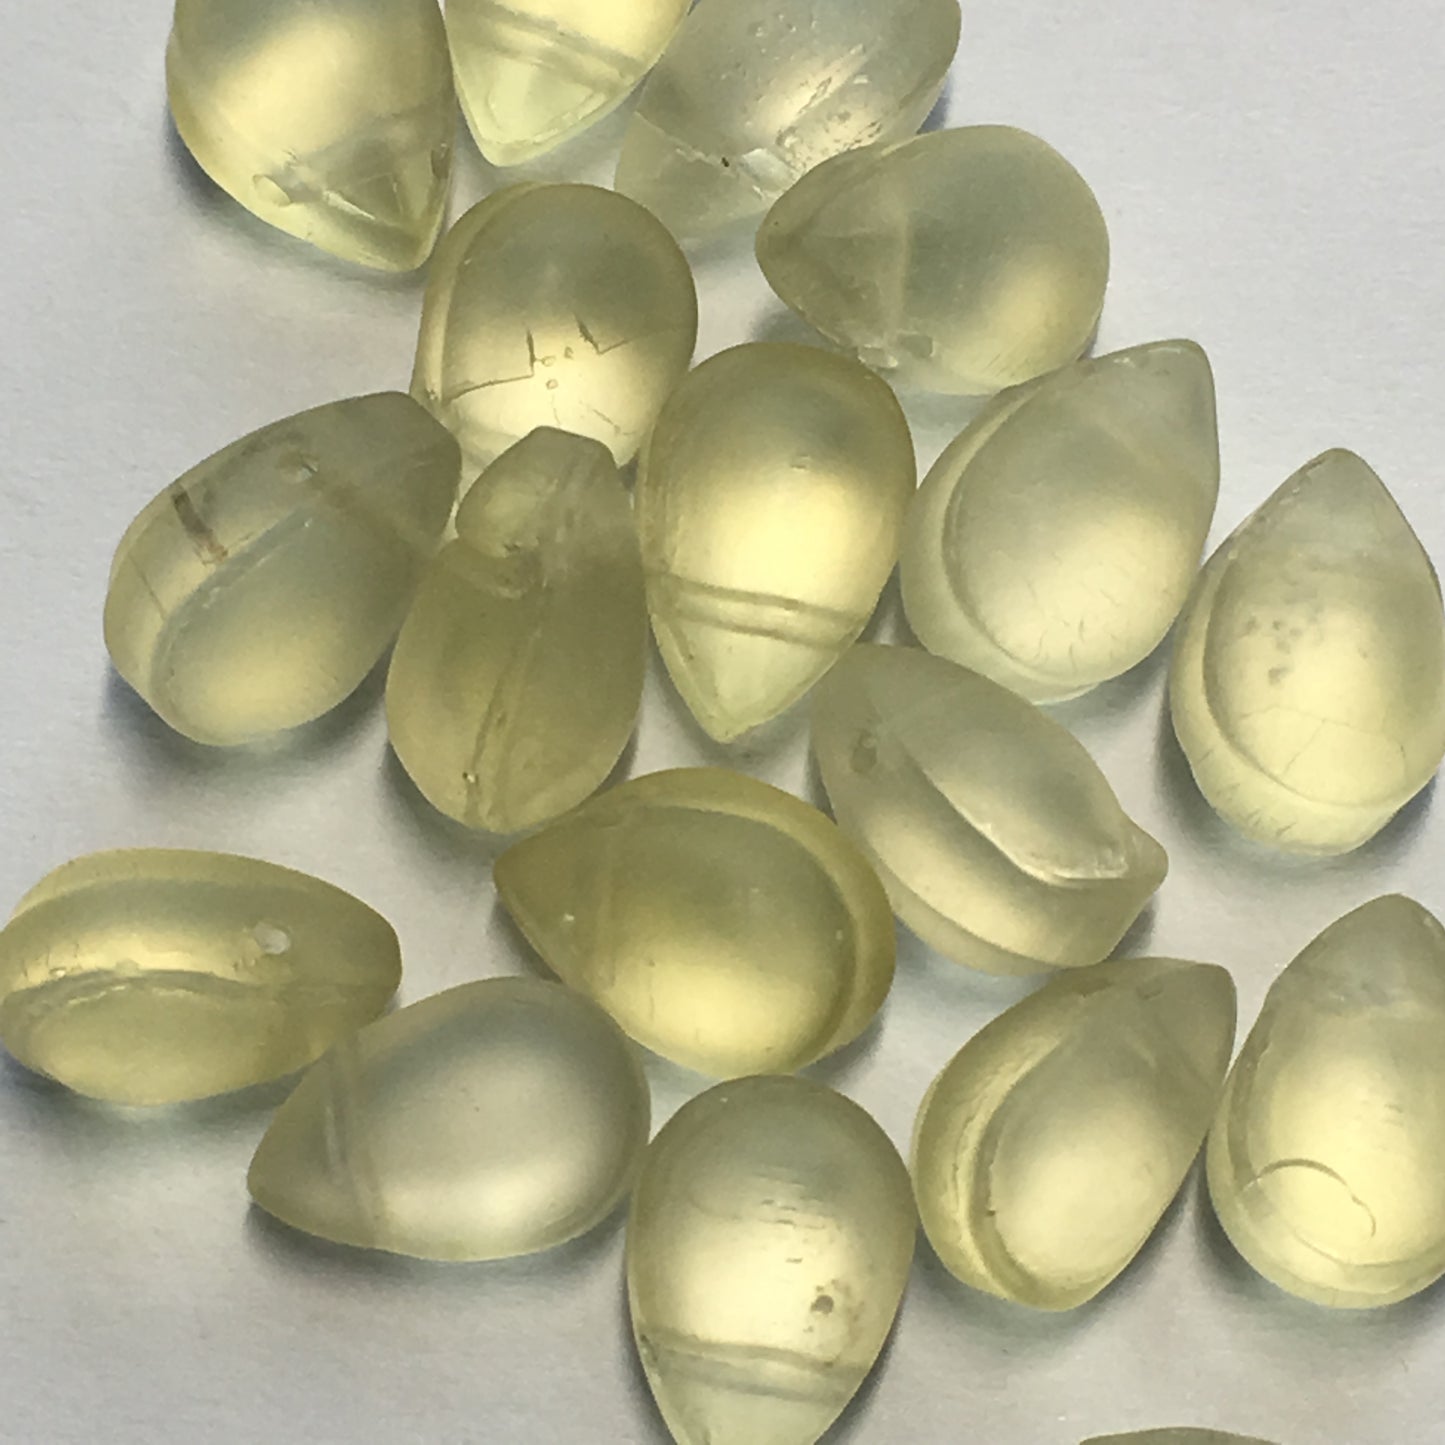 Pale Yellow Frosted Glass Teardrop Beads, 9 x 6 mm, 20 Beads